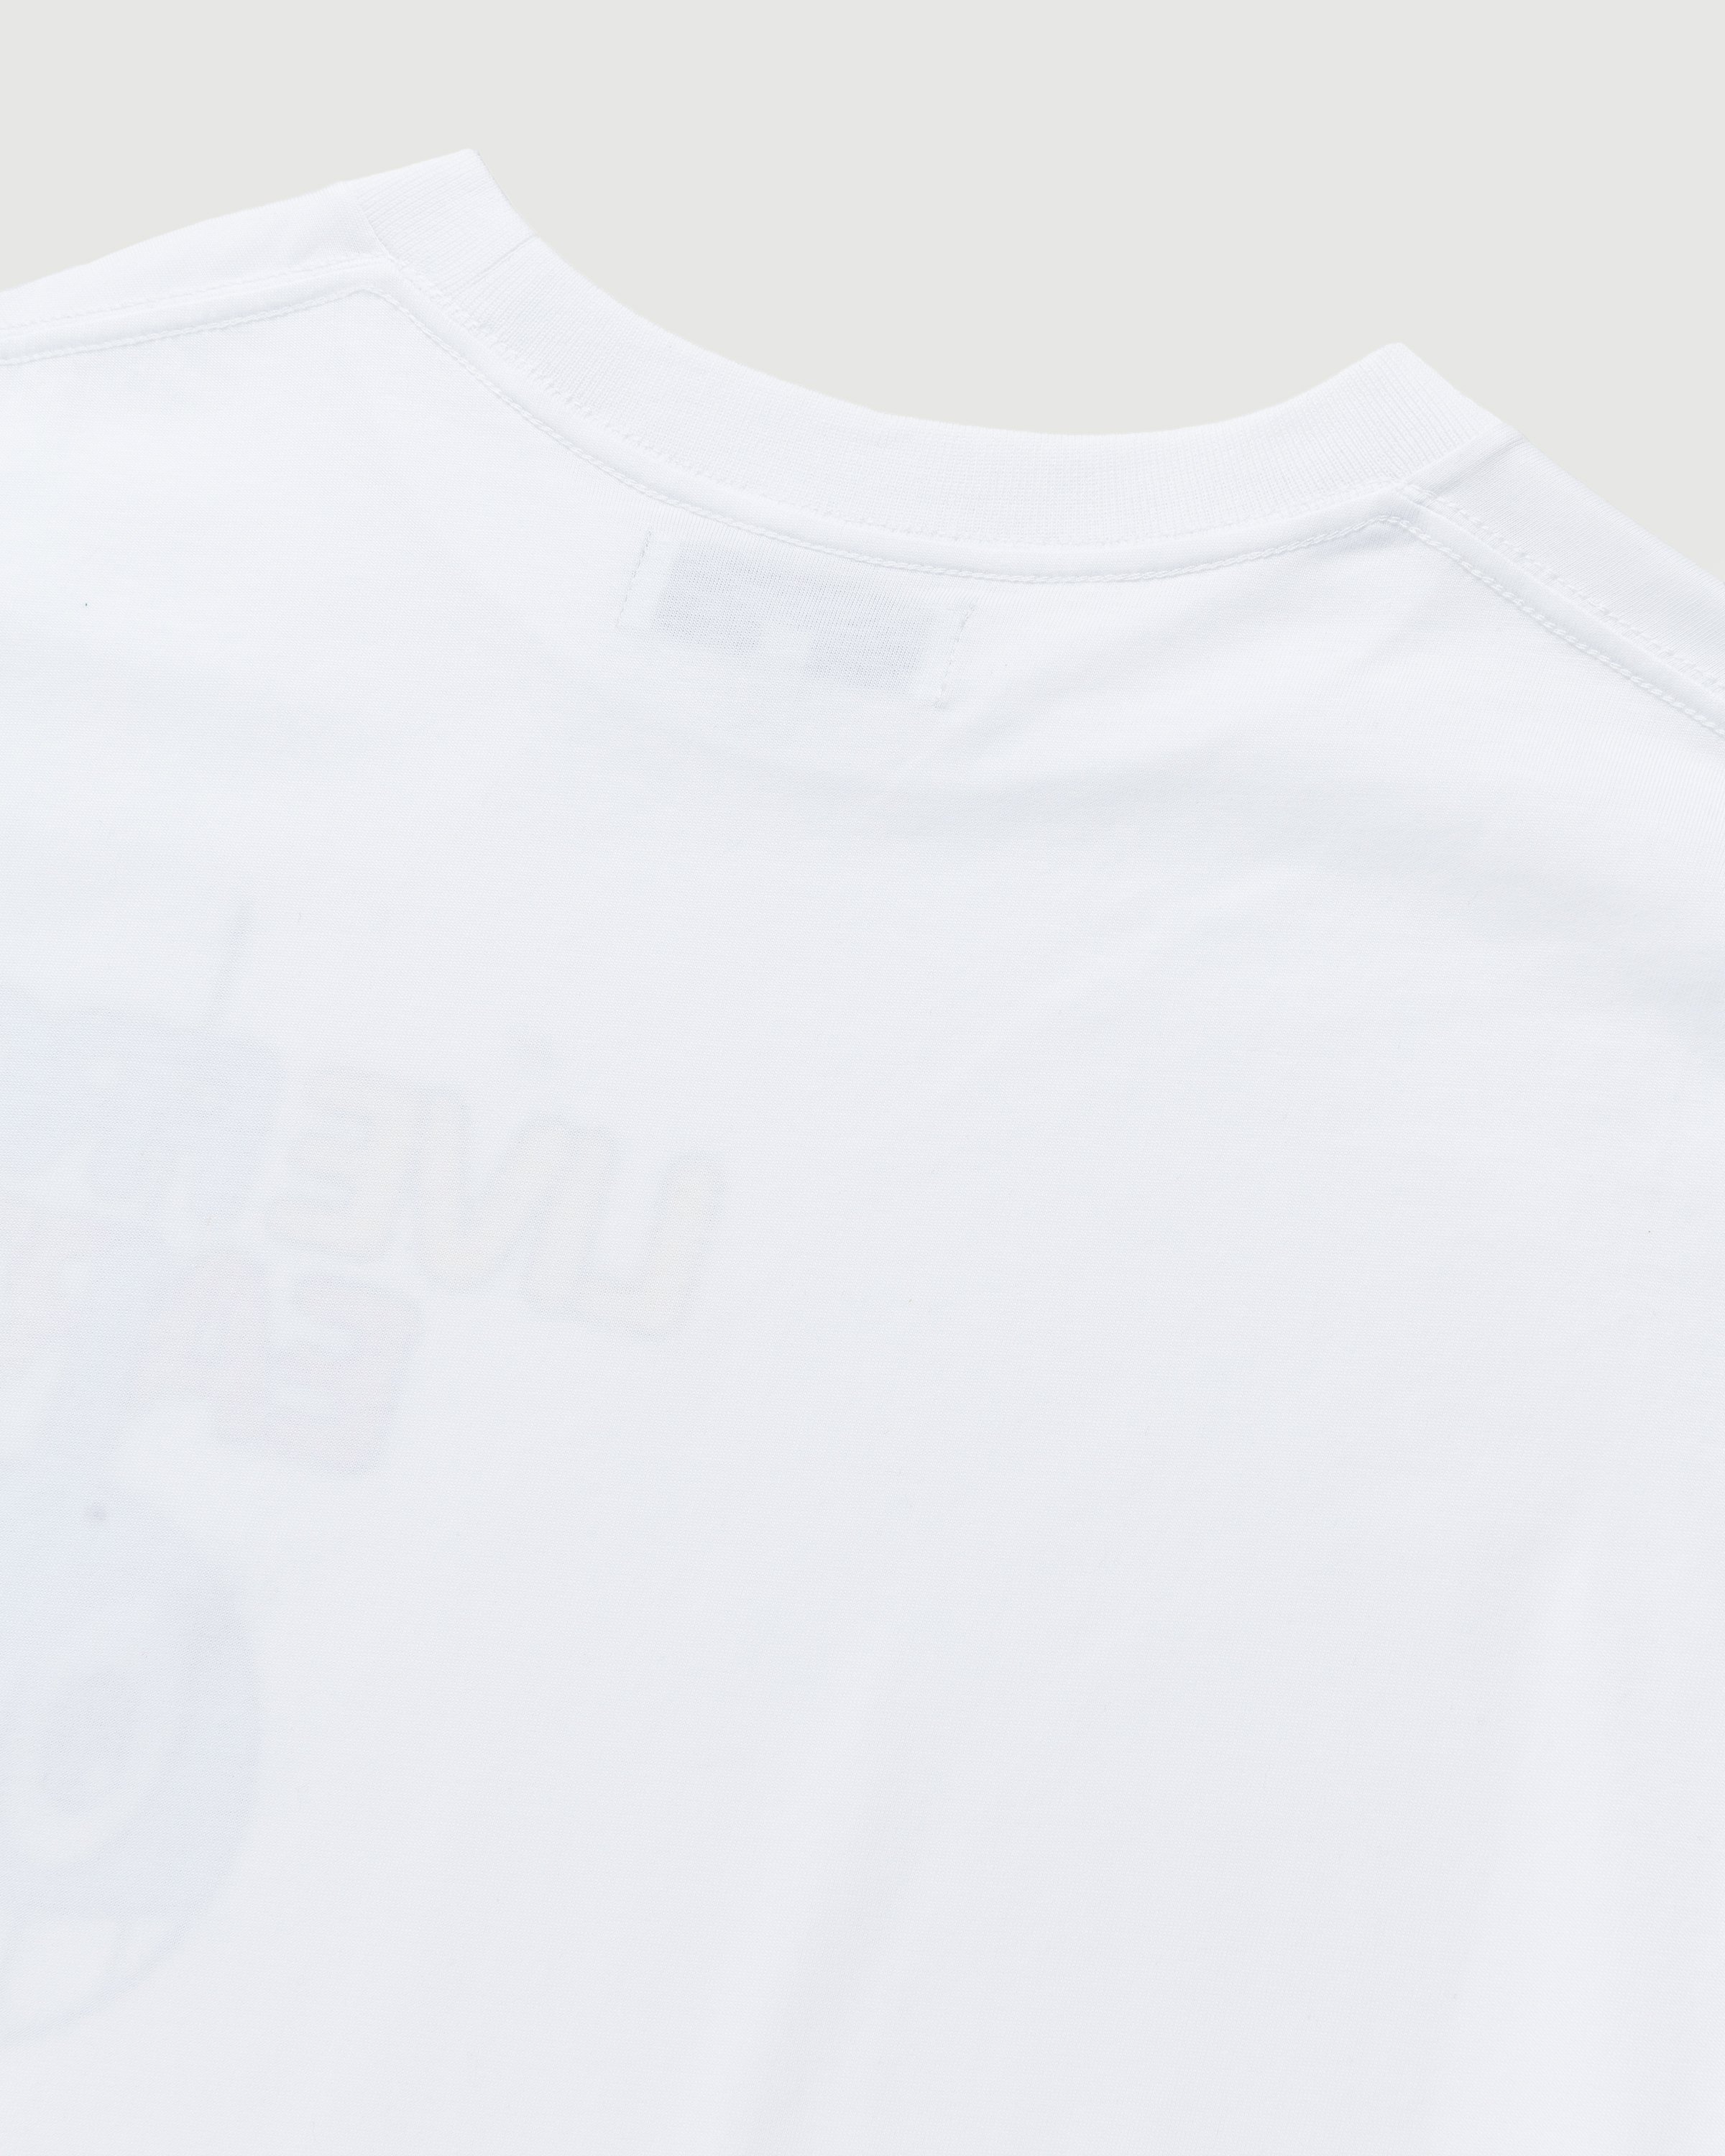 Live From Earth x Highsnobiety - BERLIN, BERLIN 3 T-Shirt White - Clothing - White - Image 4